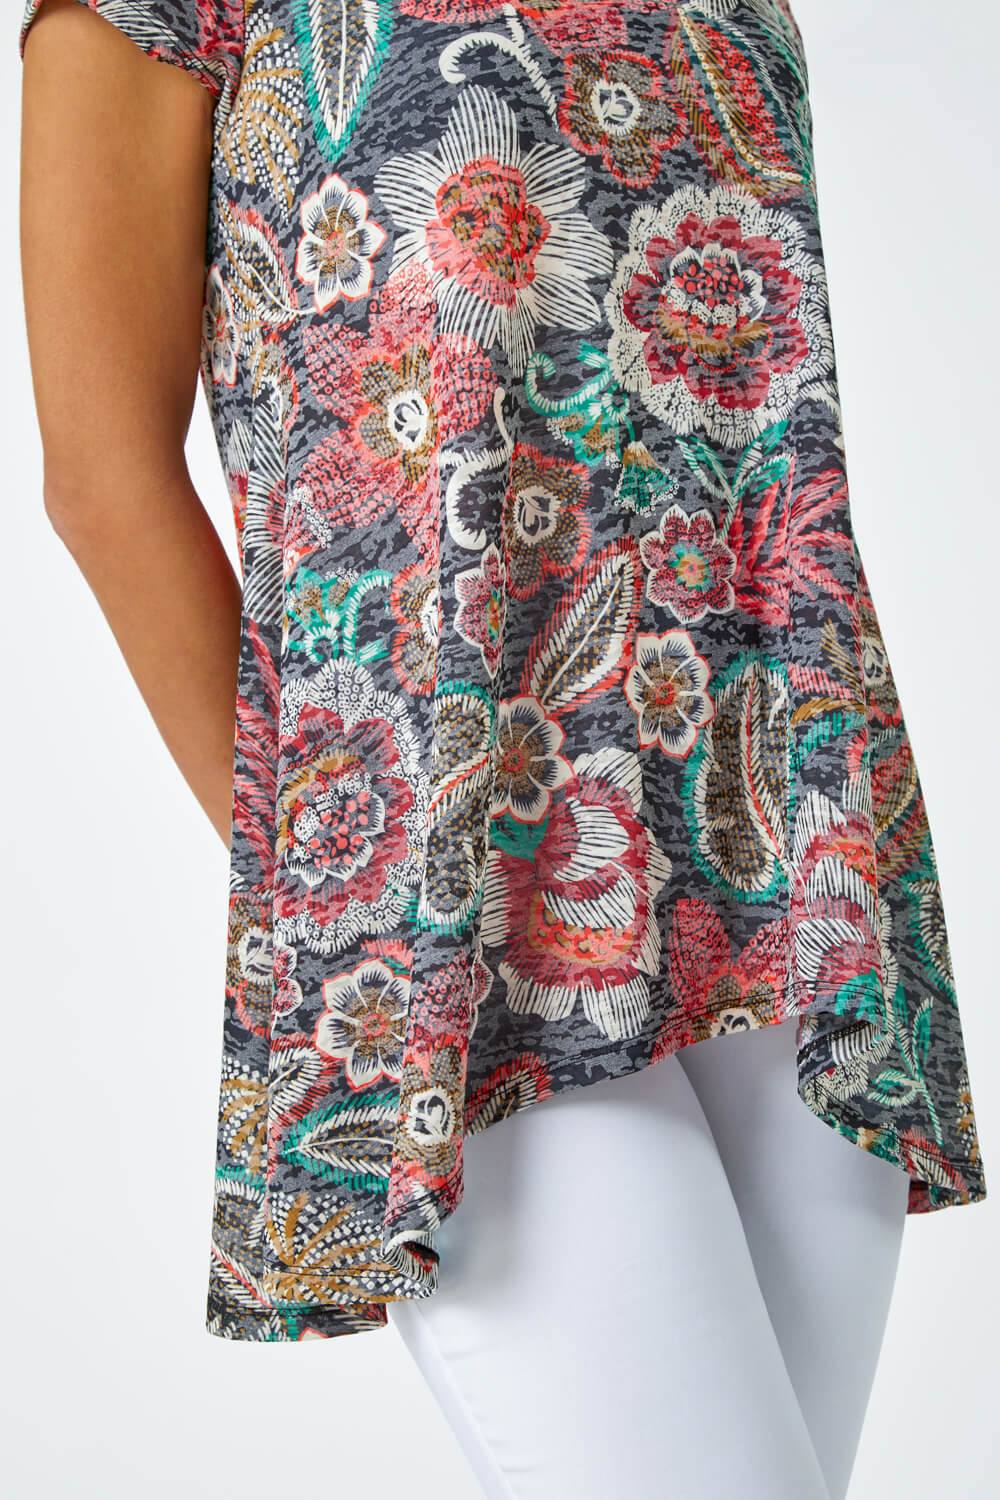 Red Floral Stretch Hanky Hem Tunic Top, Image 5 of 5